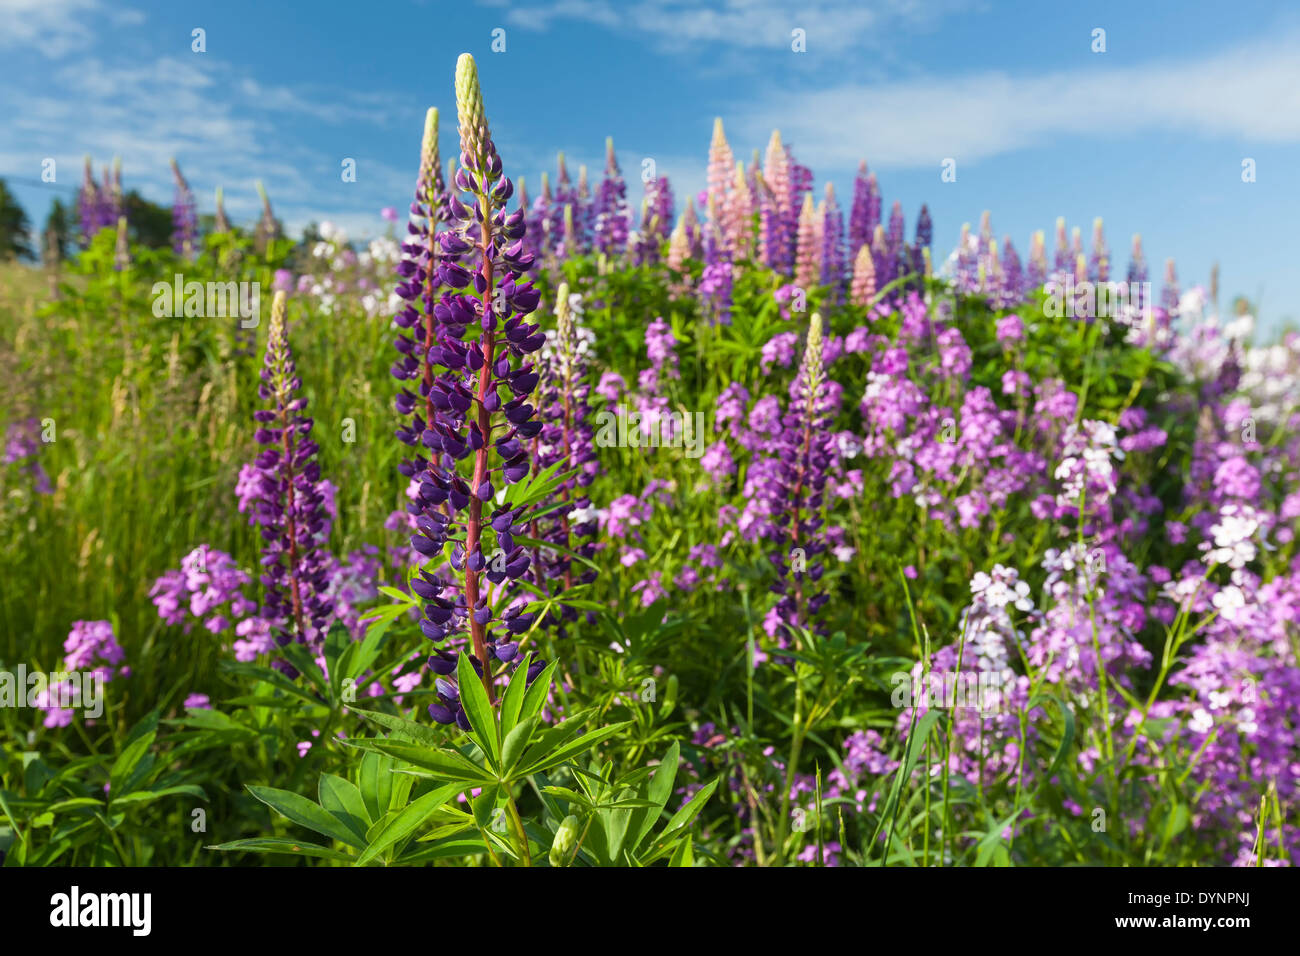 Lupins and phlox growing wild and flowering along the roadsides and streams or rural Prince Edward Island, Canada. Stock Photo